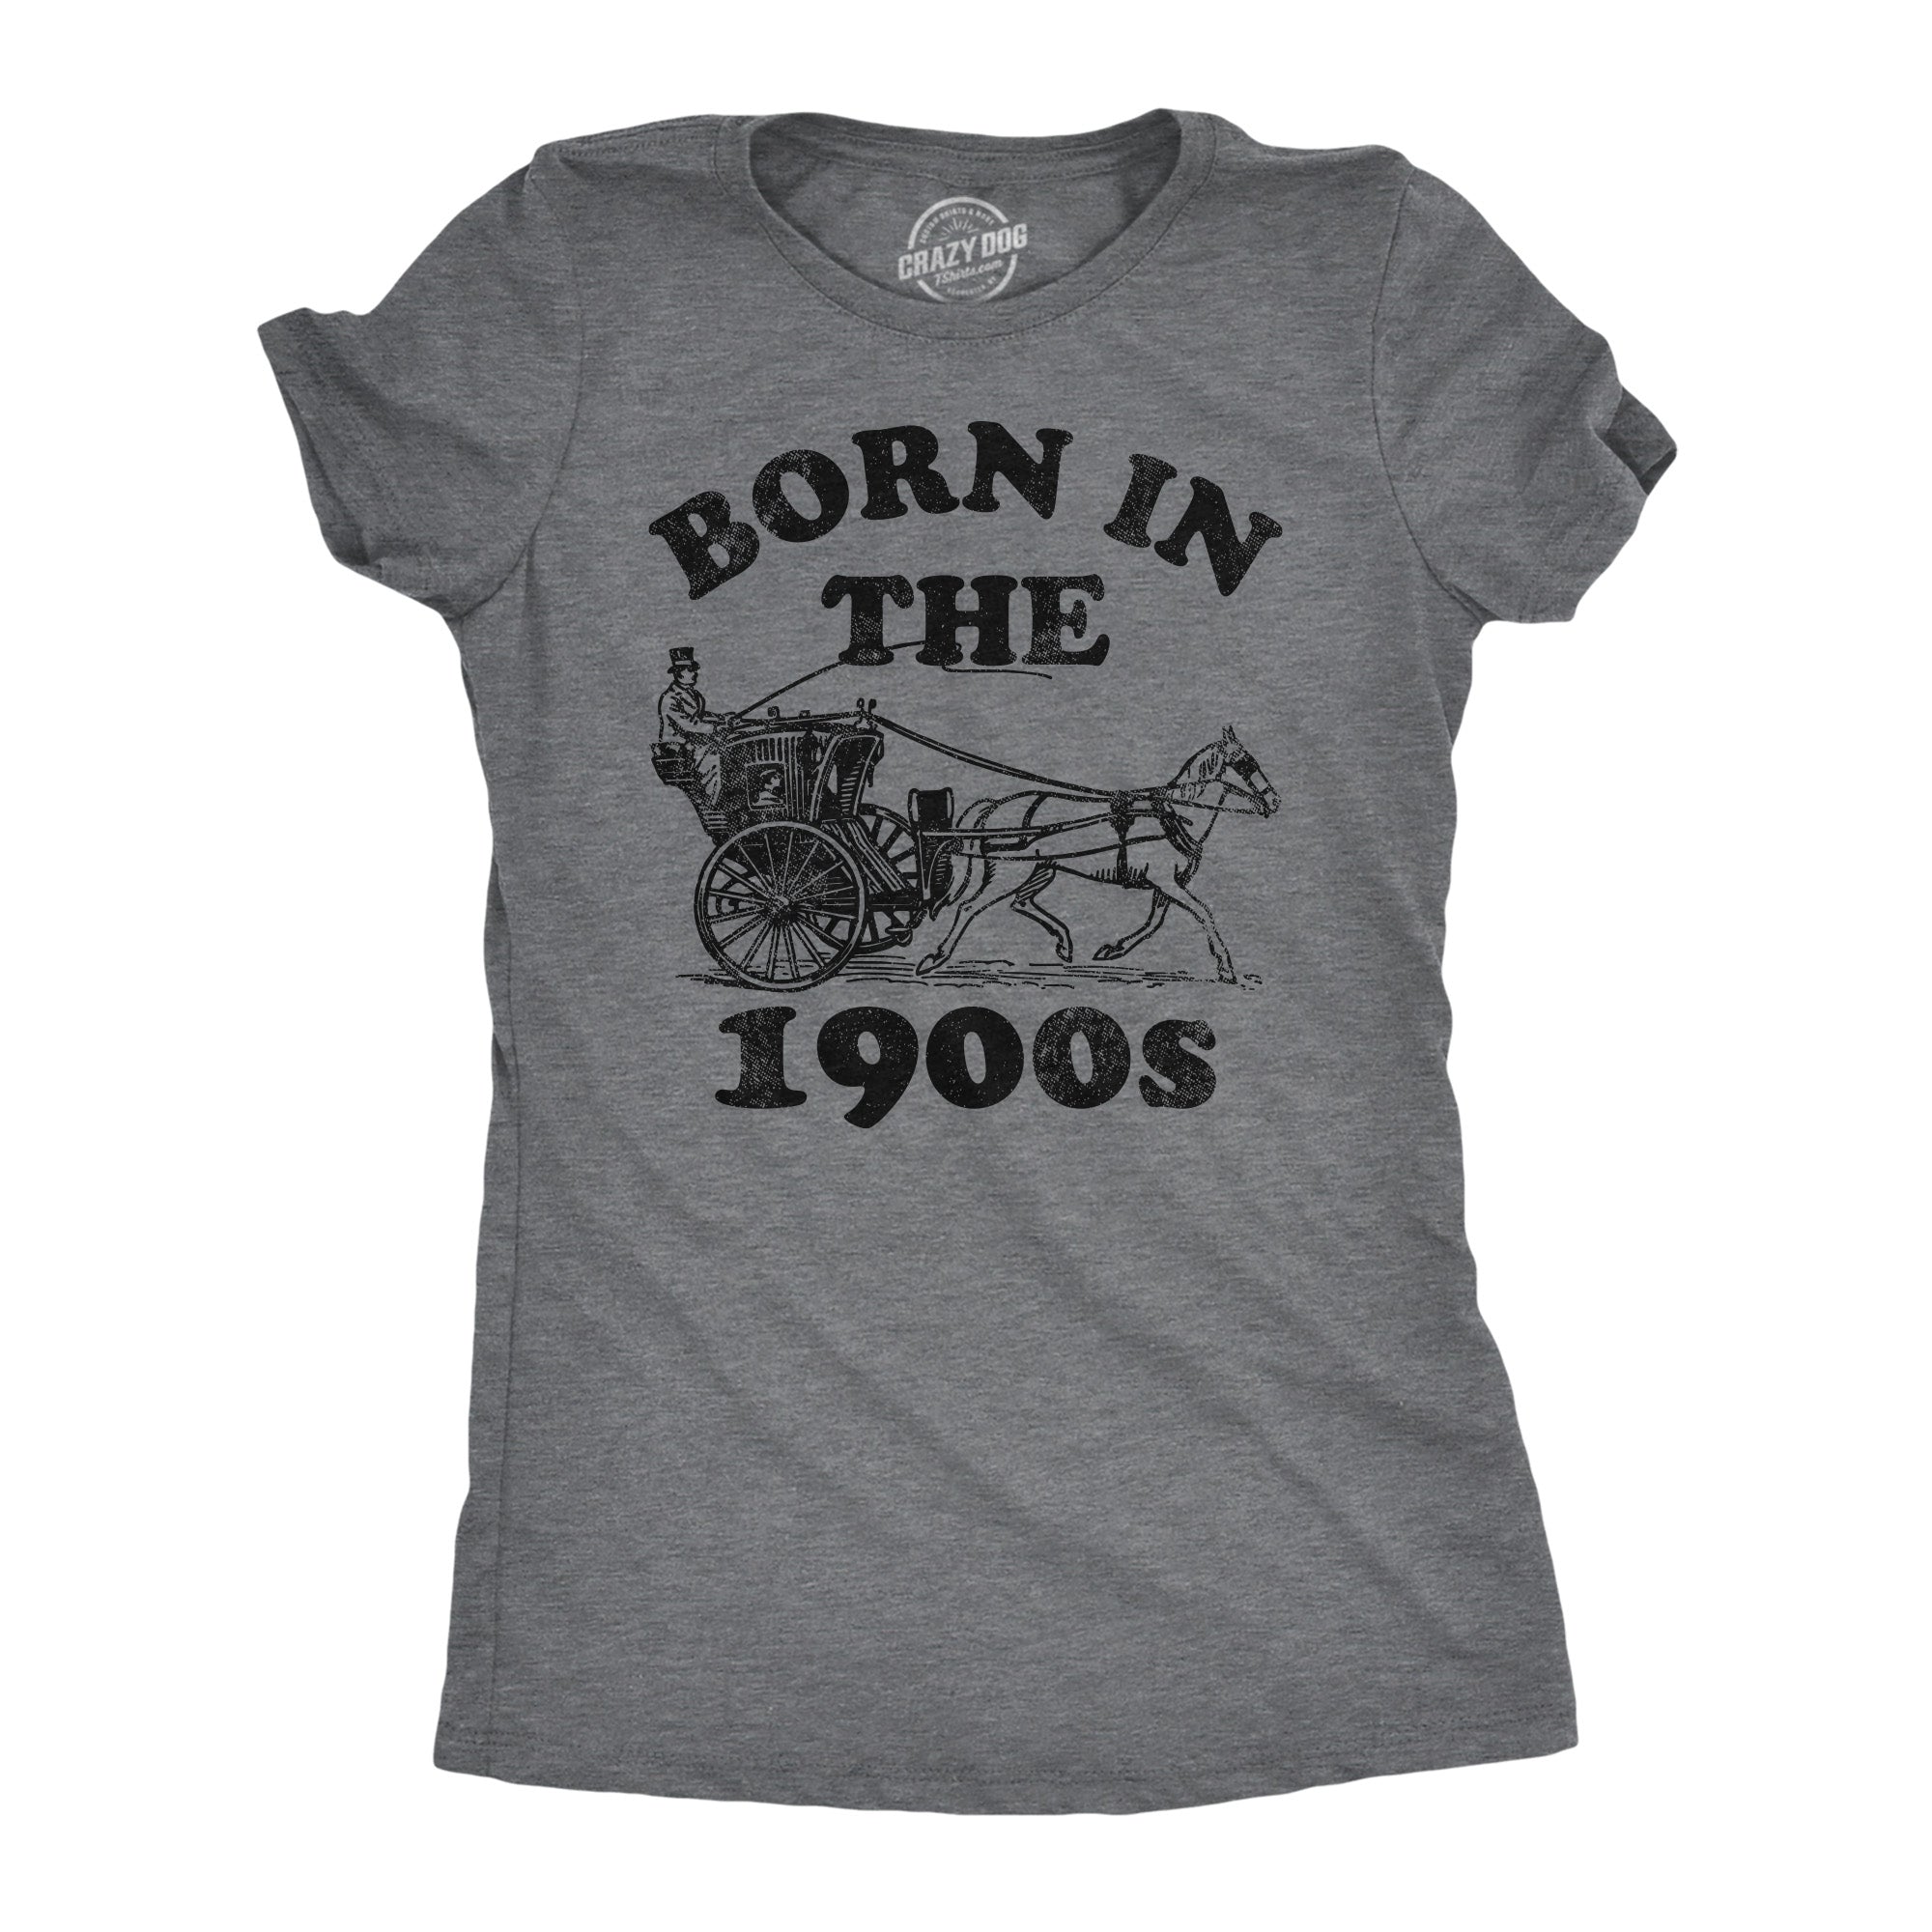 Funny Dark Heather Grey - Born In The 1900s Born In The 1900s Womens T Shirt Nerdy sarcastic Tee